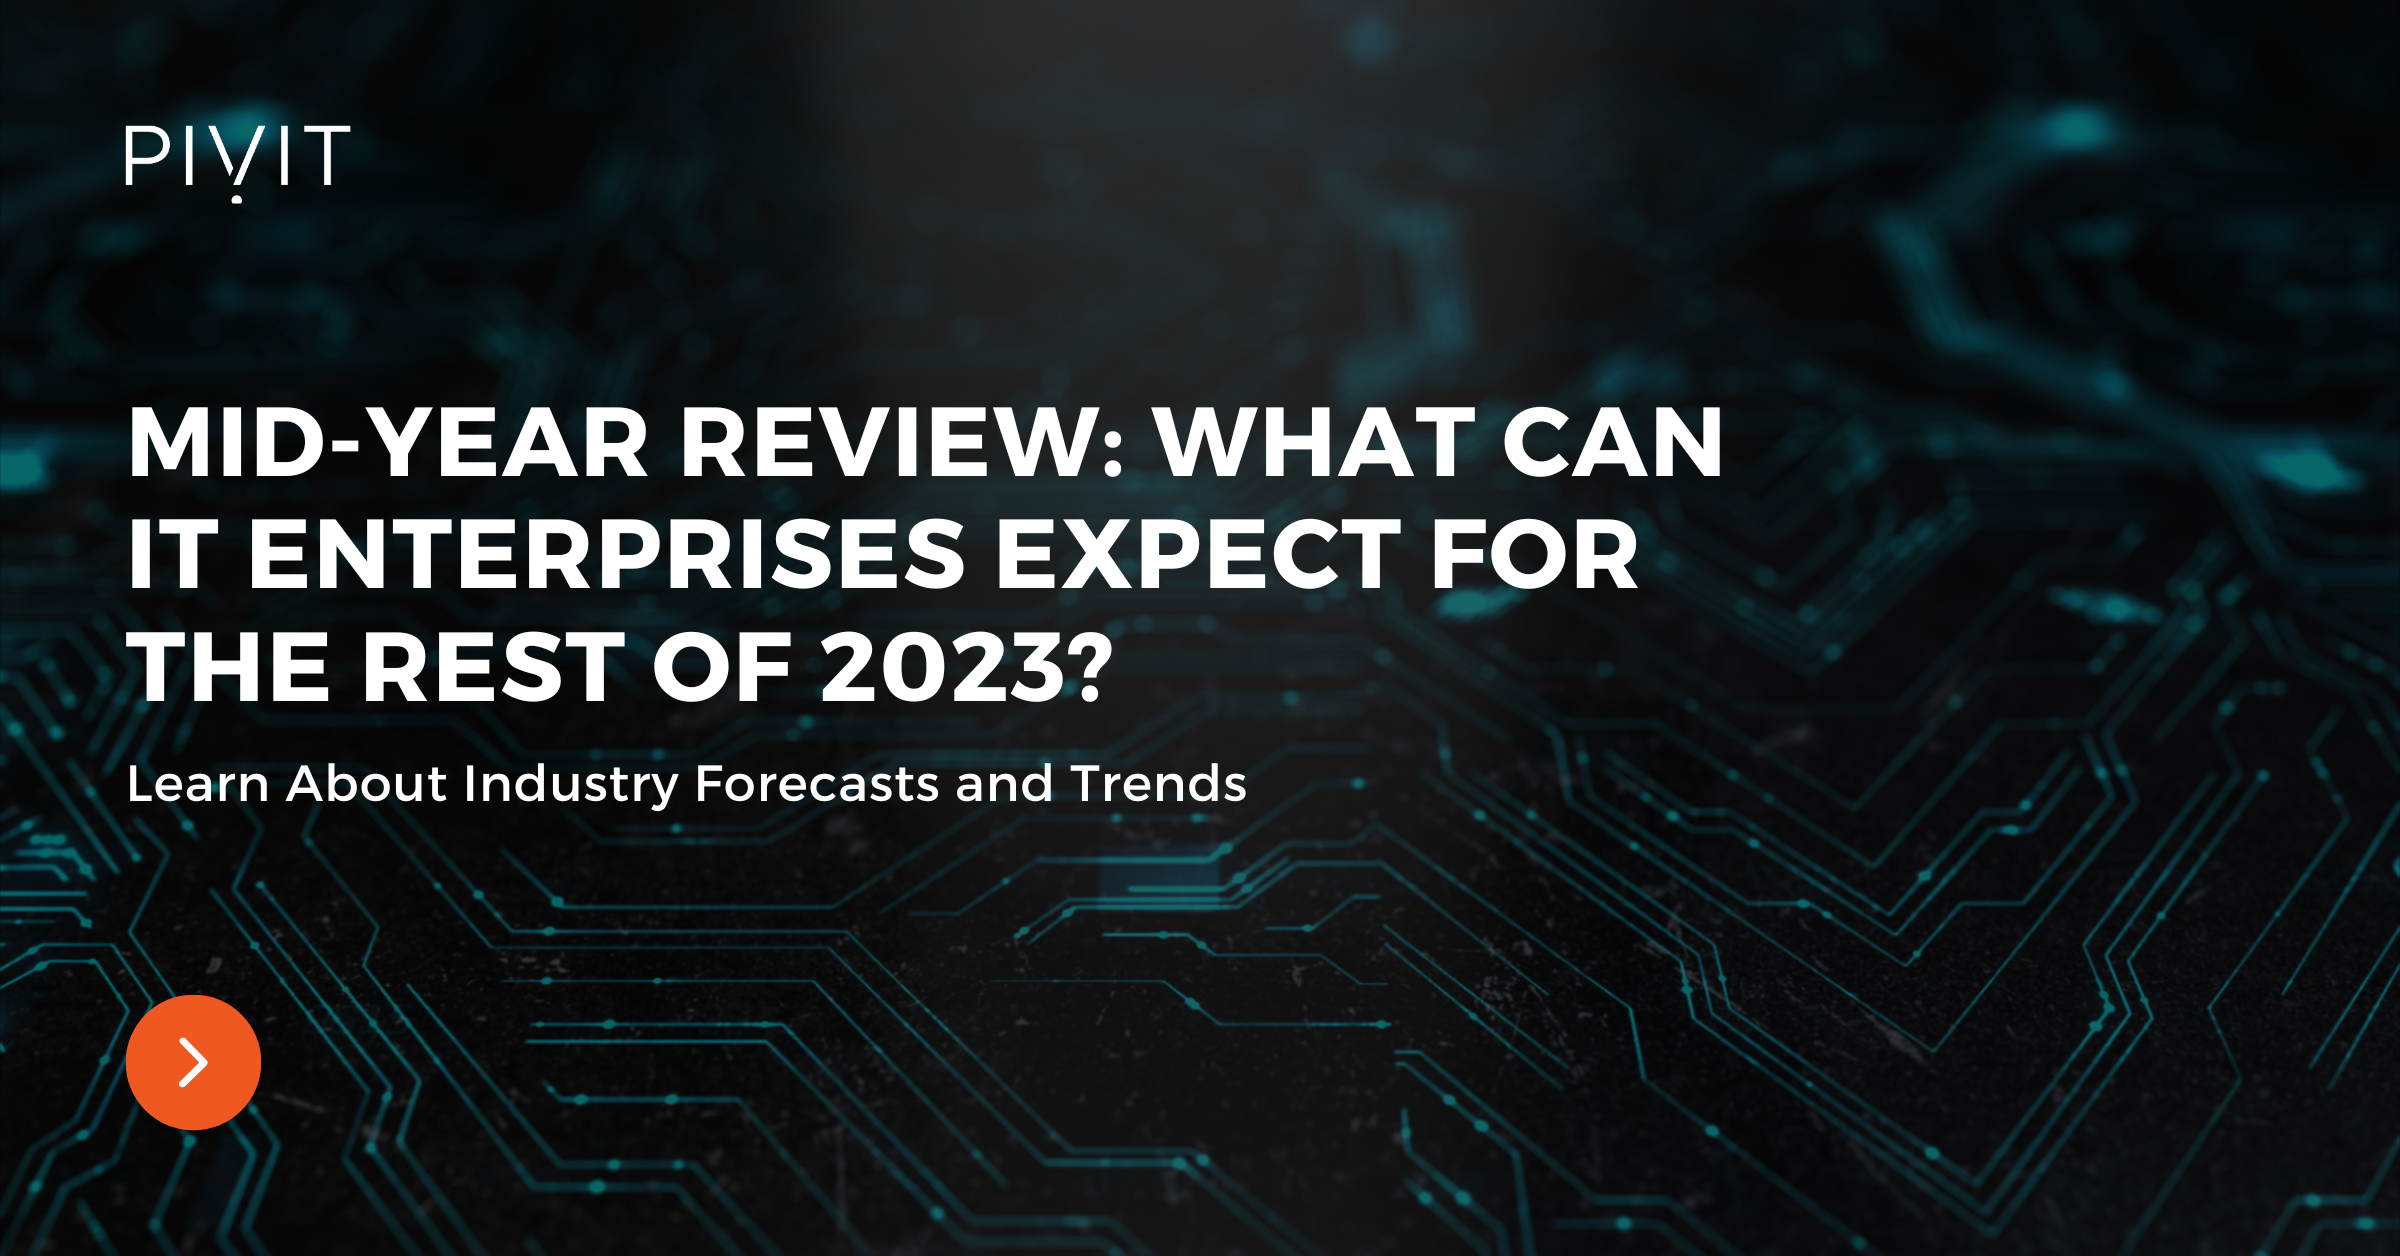 Mid-Year Review: What Can IT Enterprises Expect for the Rest of 2023